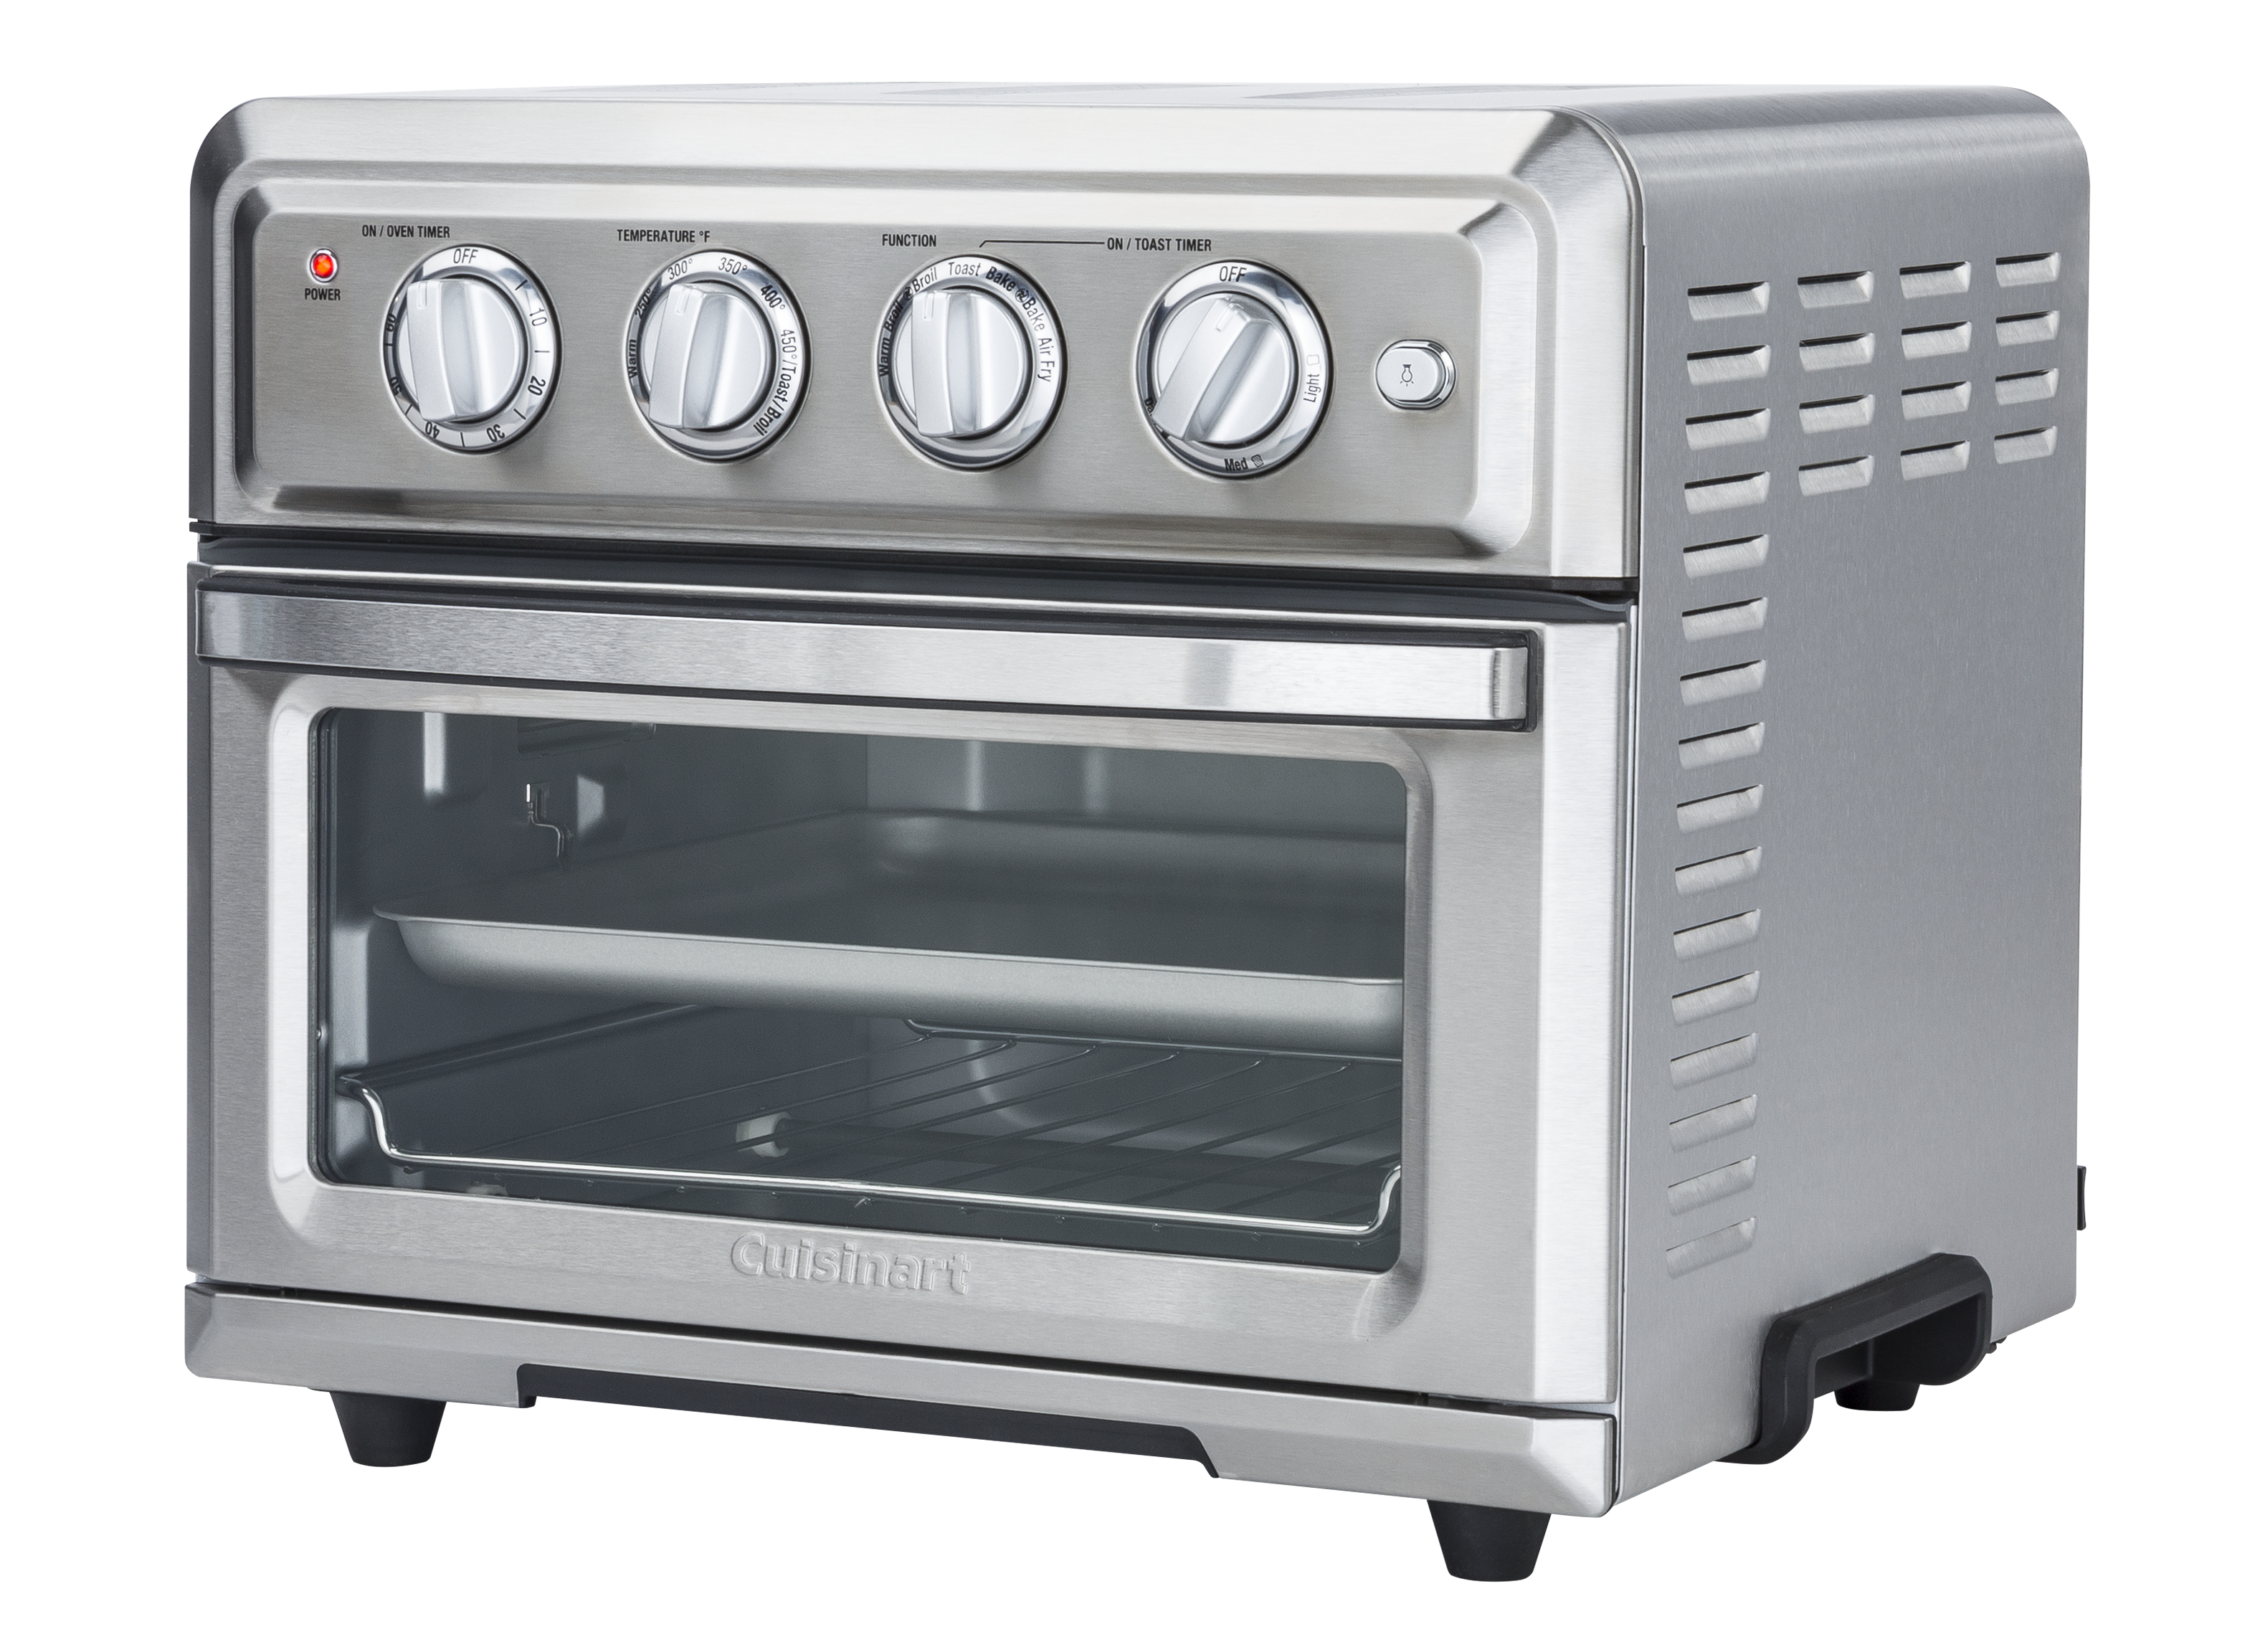 Cuisinart TOA60 Toaster & Toaster Oven Review - Consumer Reports